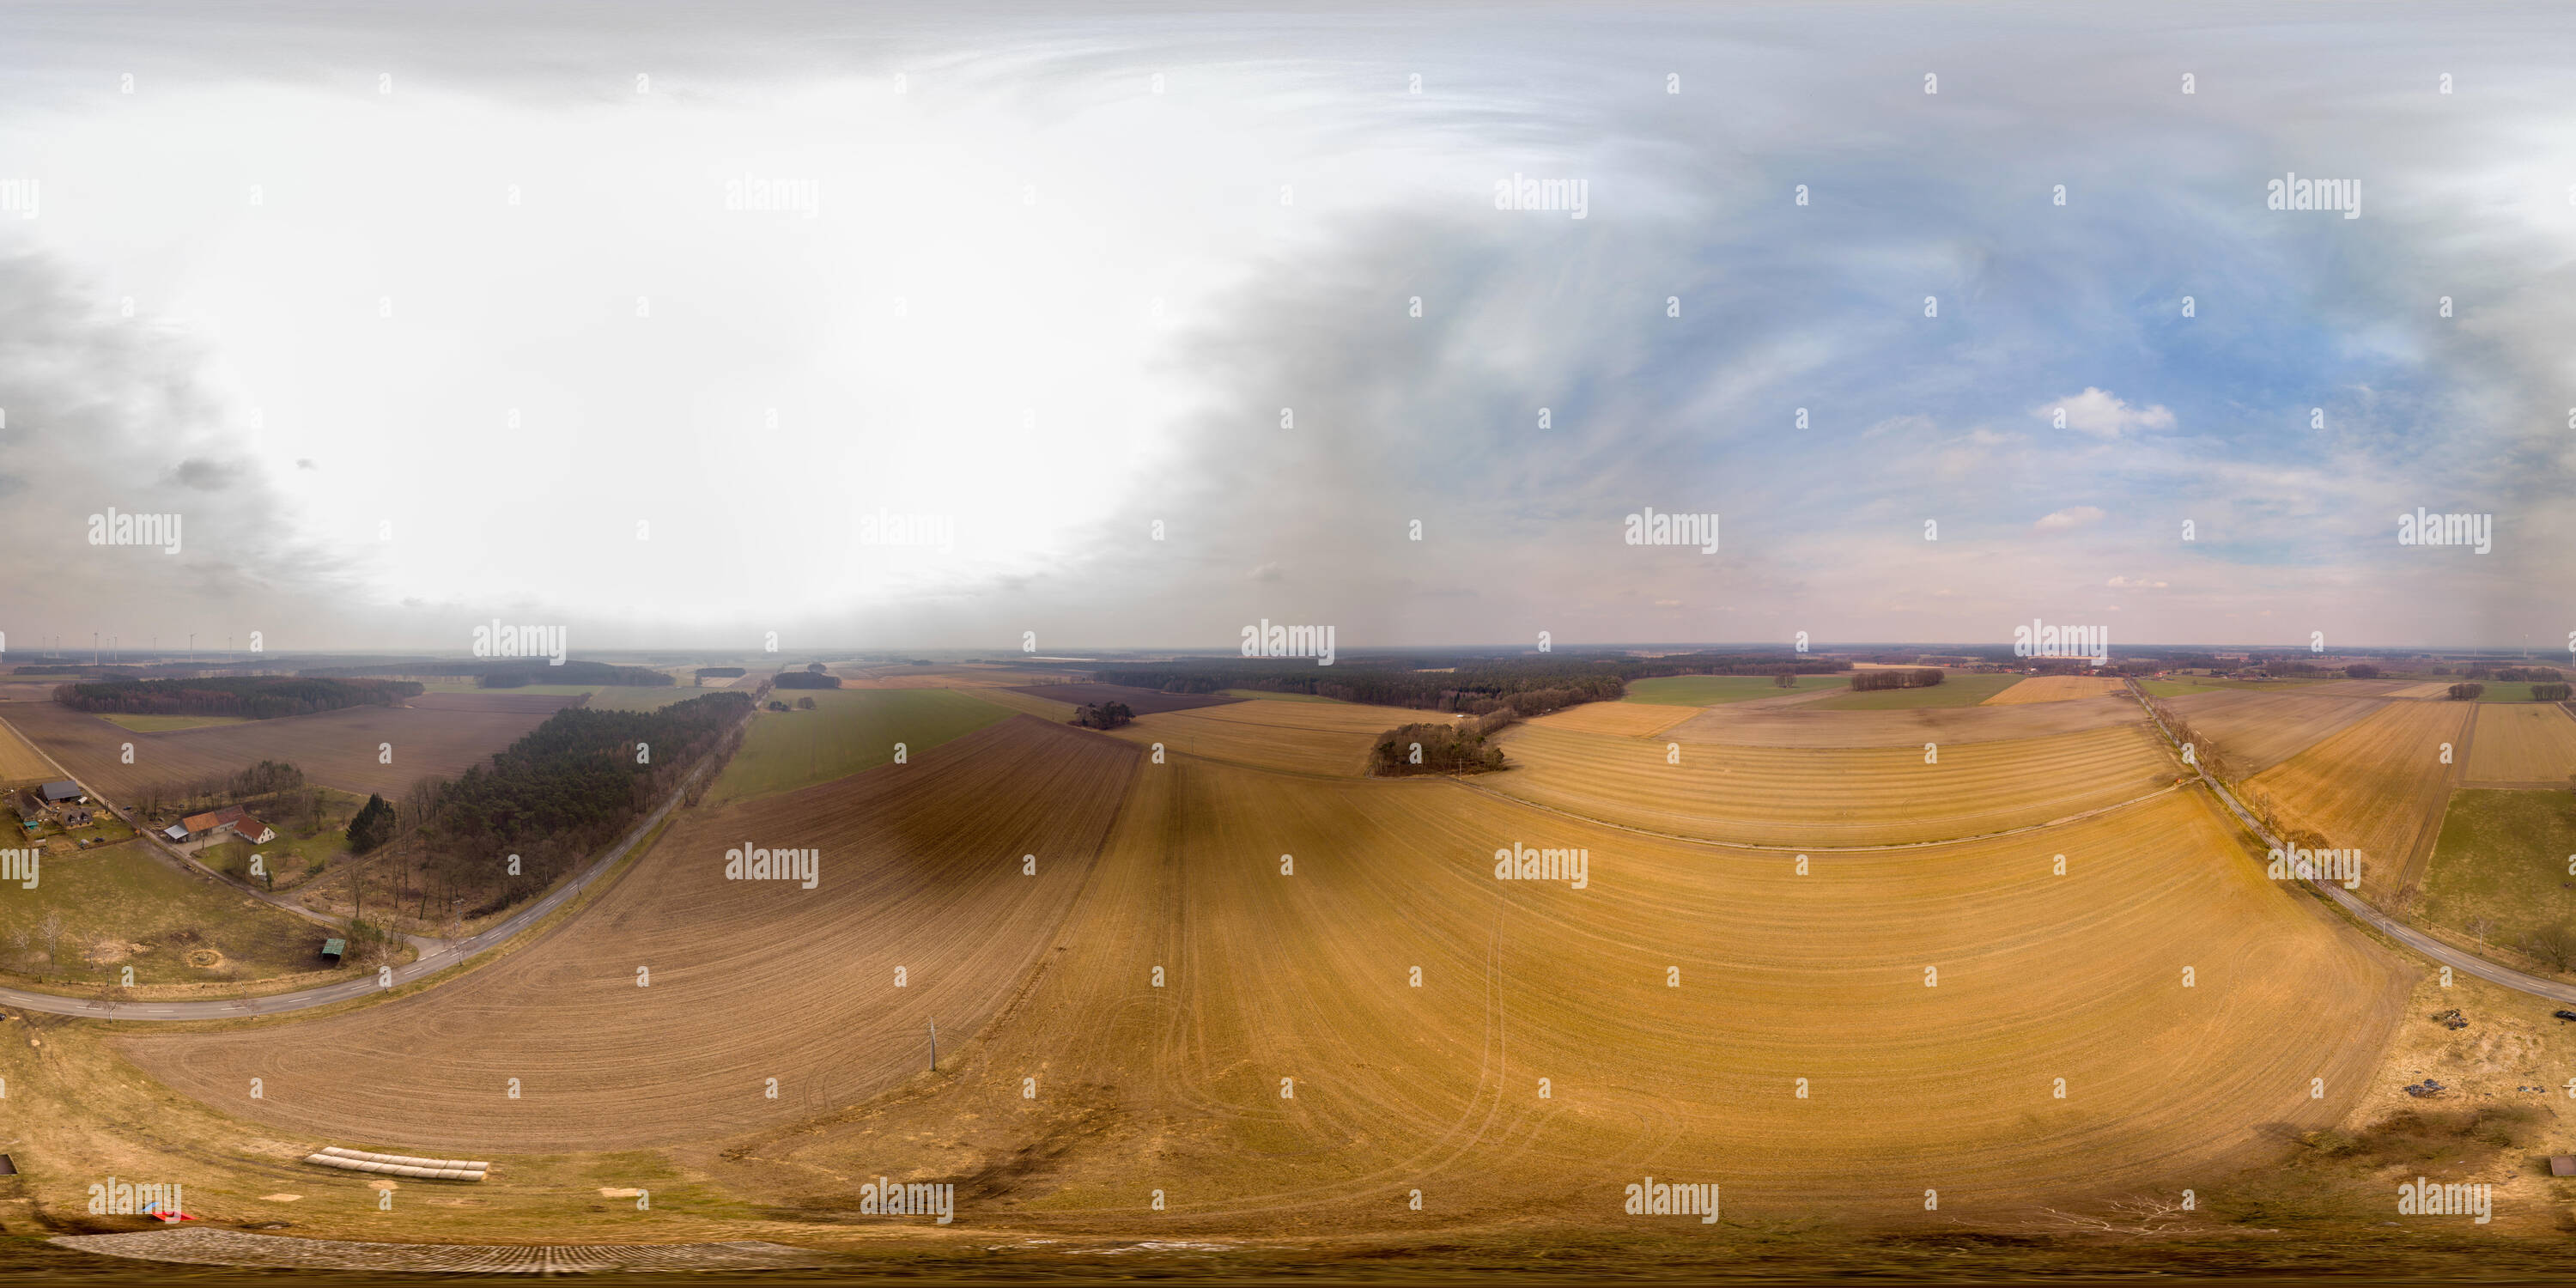 360 degree panoramic view of 360-degree overview of a harvested field in the lowlands of northern Germany with a farm in the background and windmills on the horizon.